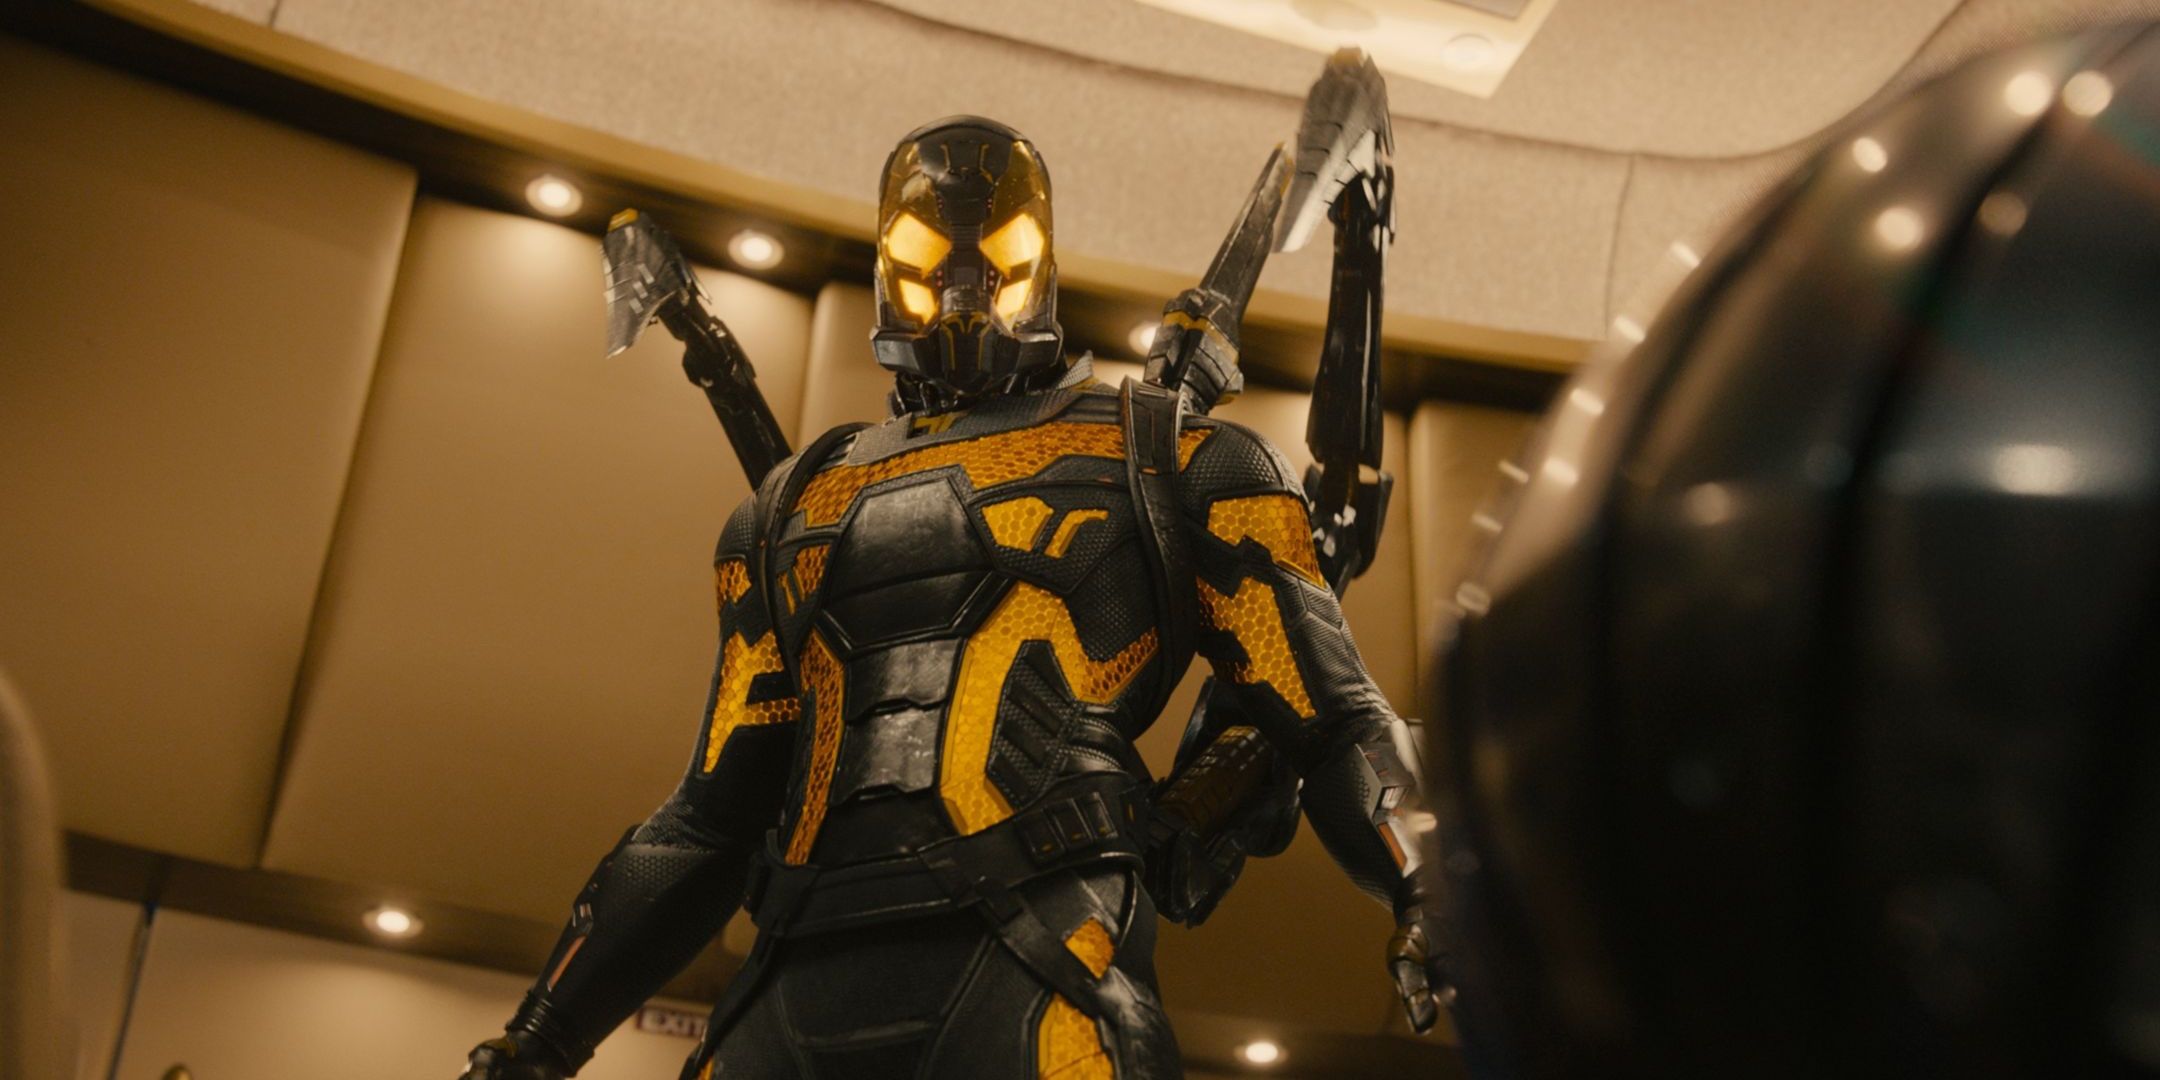 AntMan Director Teases Yellowjacket Could Still Be Alive